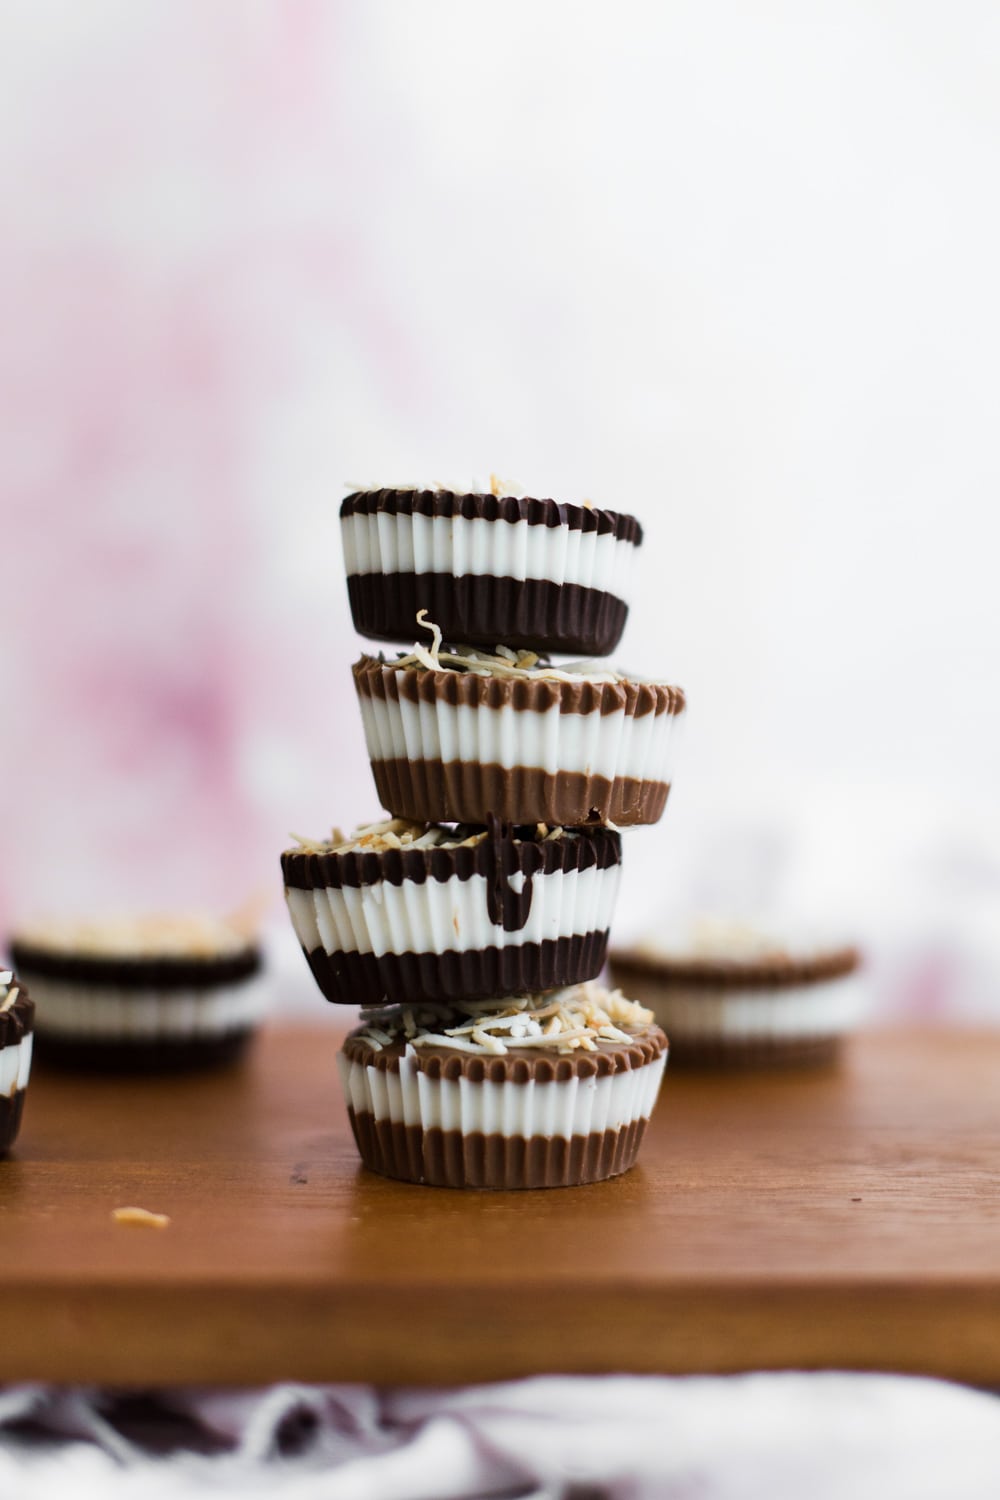 These 2 Ingredient Chocolate Coconut Butter Cups filled with homemade Coconut Butter are an amazing alternative to the regular Peanut Butter Cup! #vegan #coconut #peanutbuttercup #chocolate #simple #easy #nobake #dessert #kids #healthy